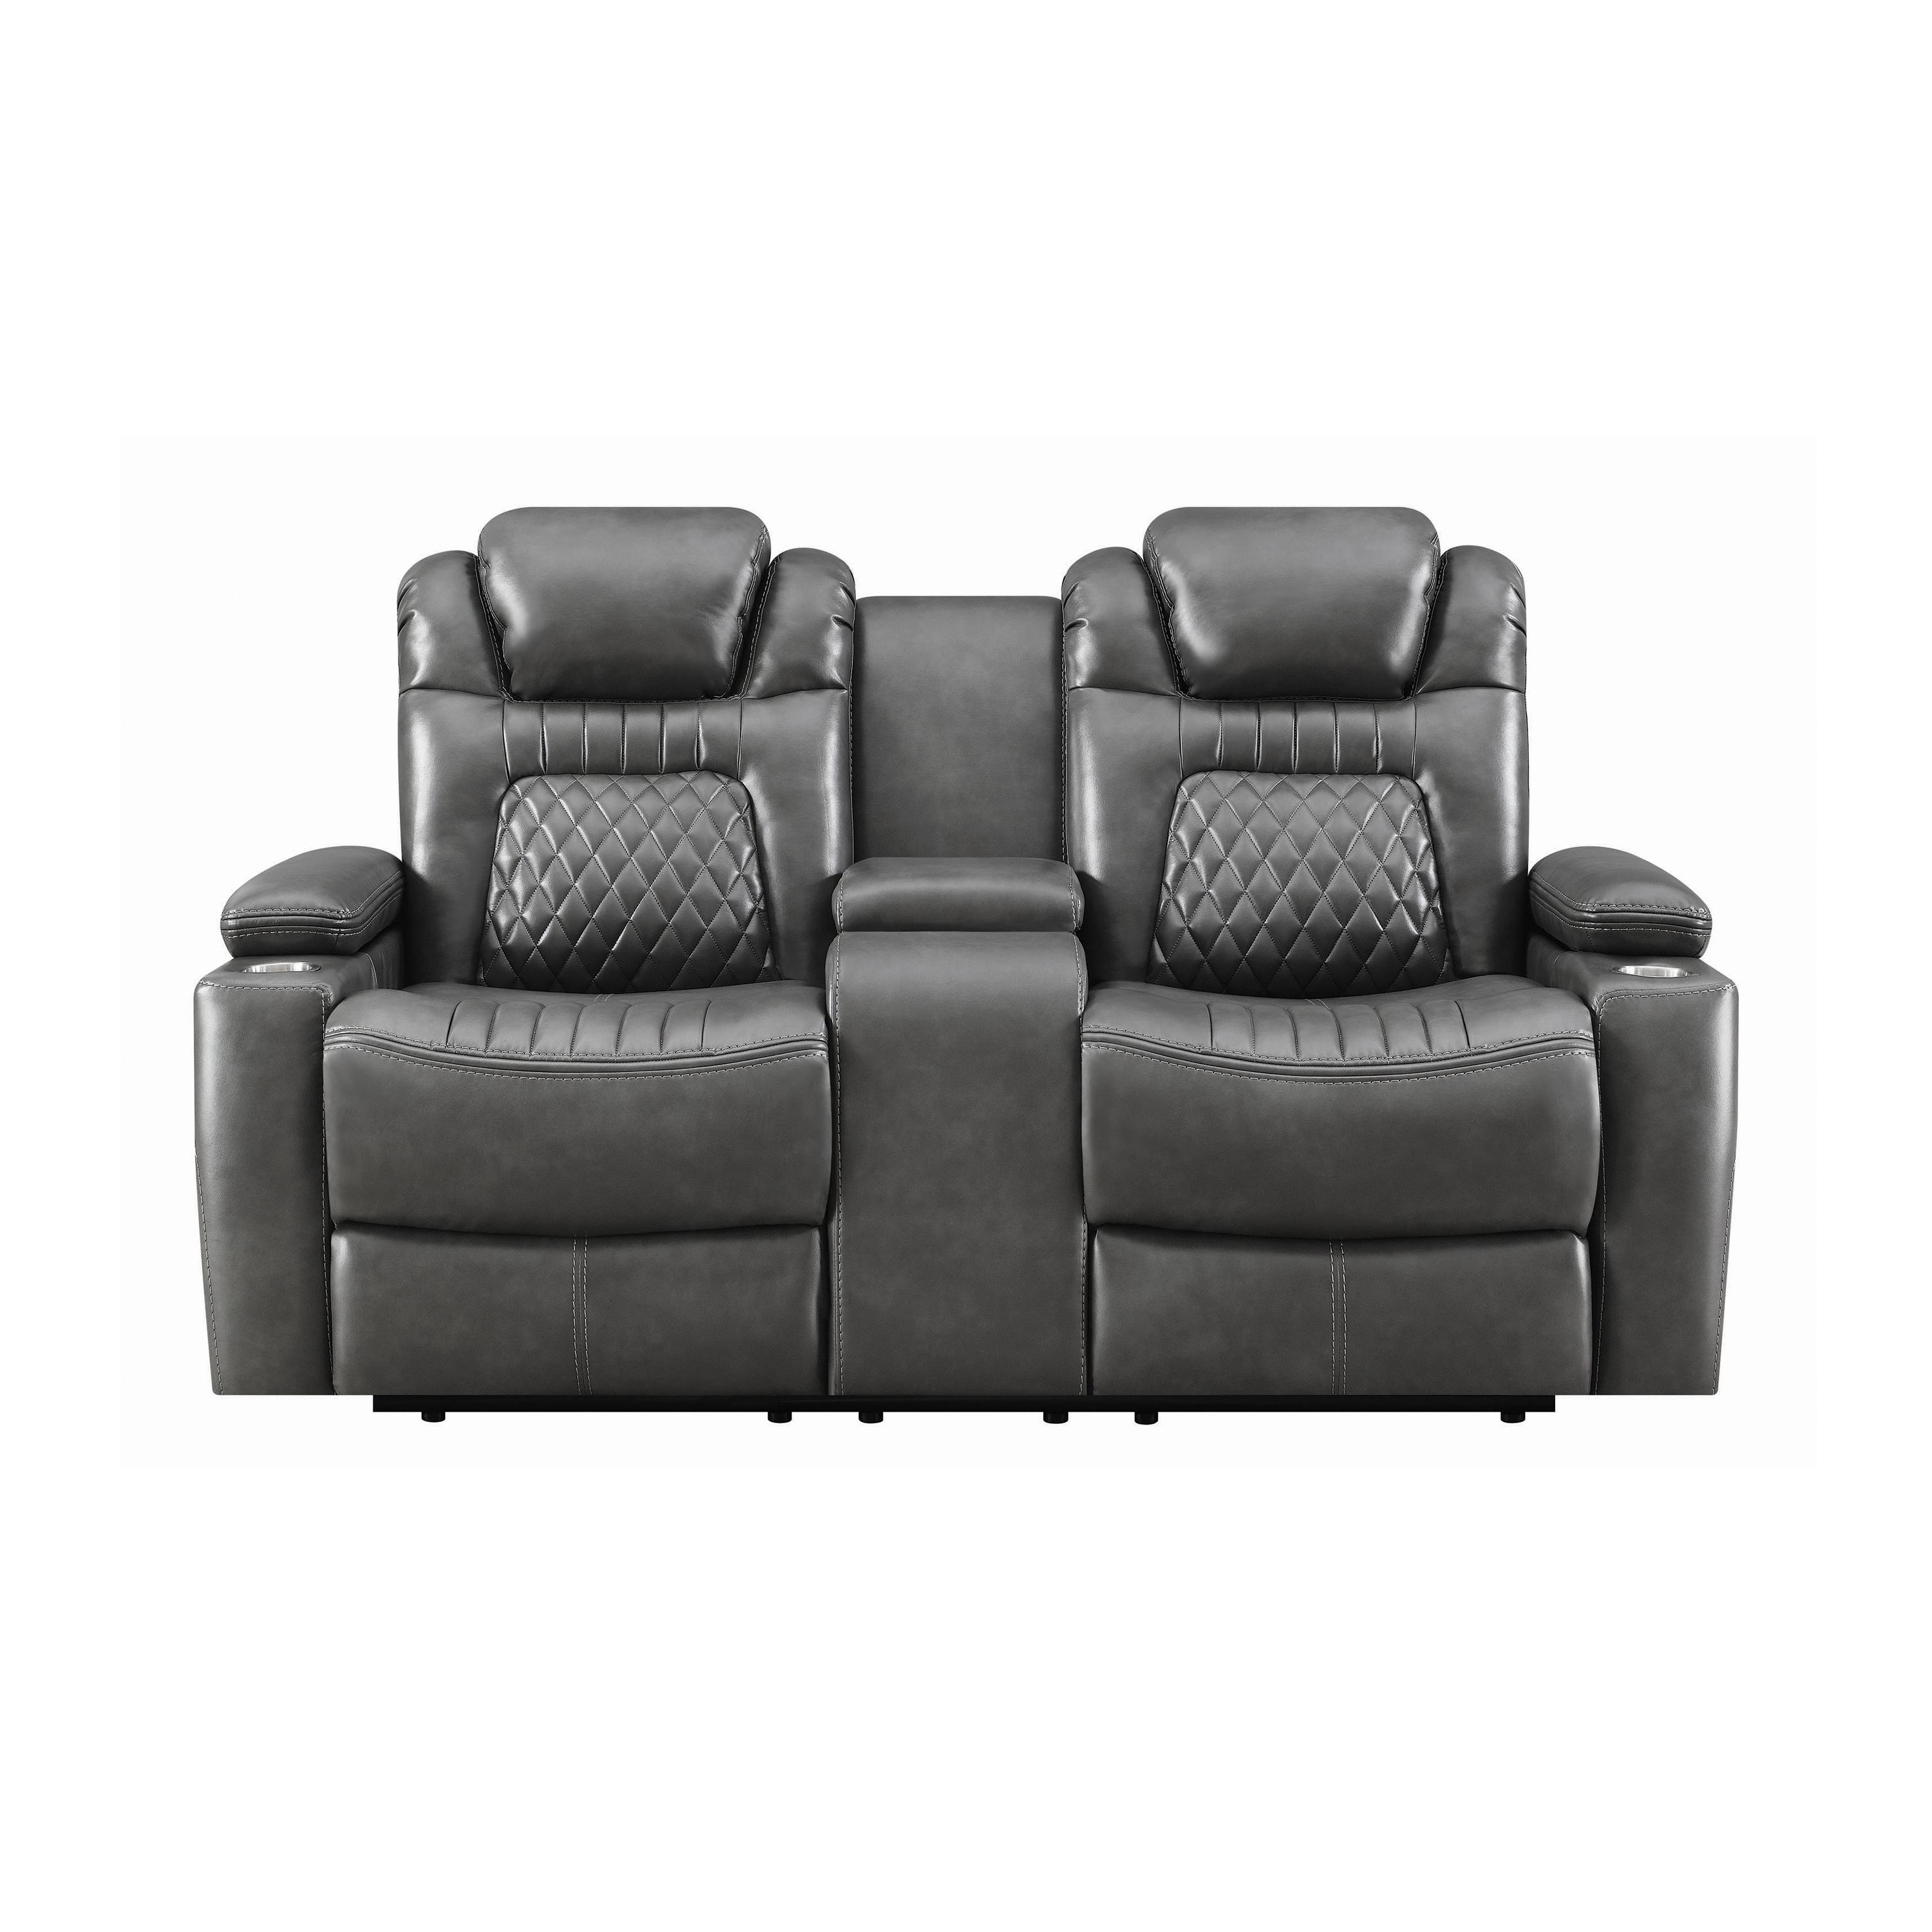 Transitional Power loveseat 603415PP Korbach 603415PP in Charcoal 